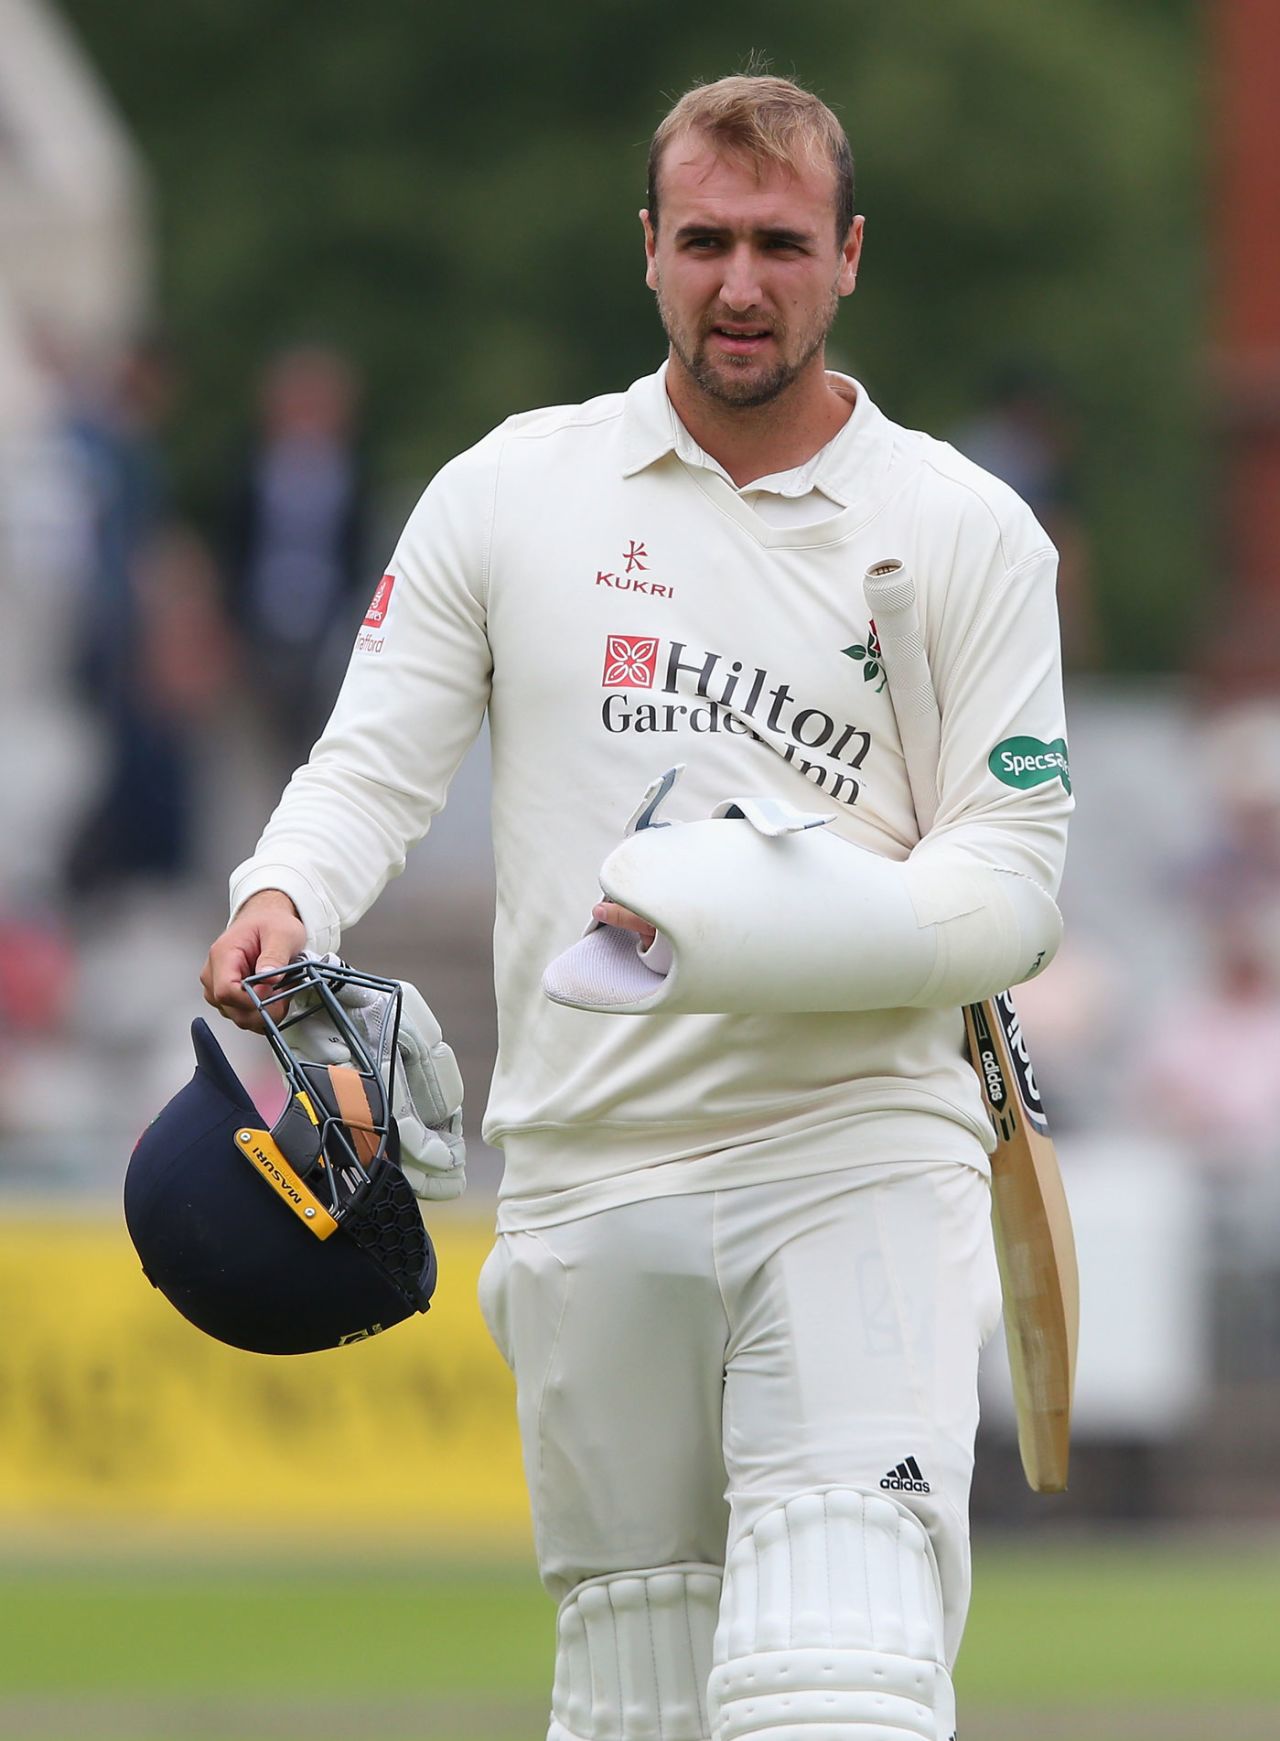 Liam Livingstone walked out to bat despite a broken thumb, Lancashire v Yorkshire, County Championship, Division Two, Cheltenham, July 24, 2018